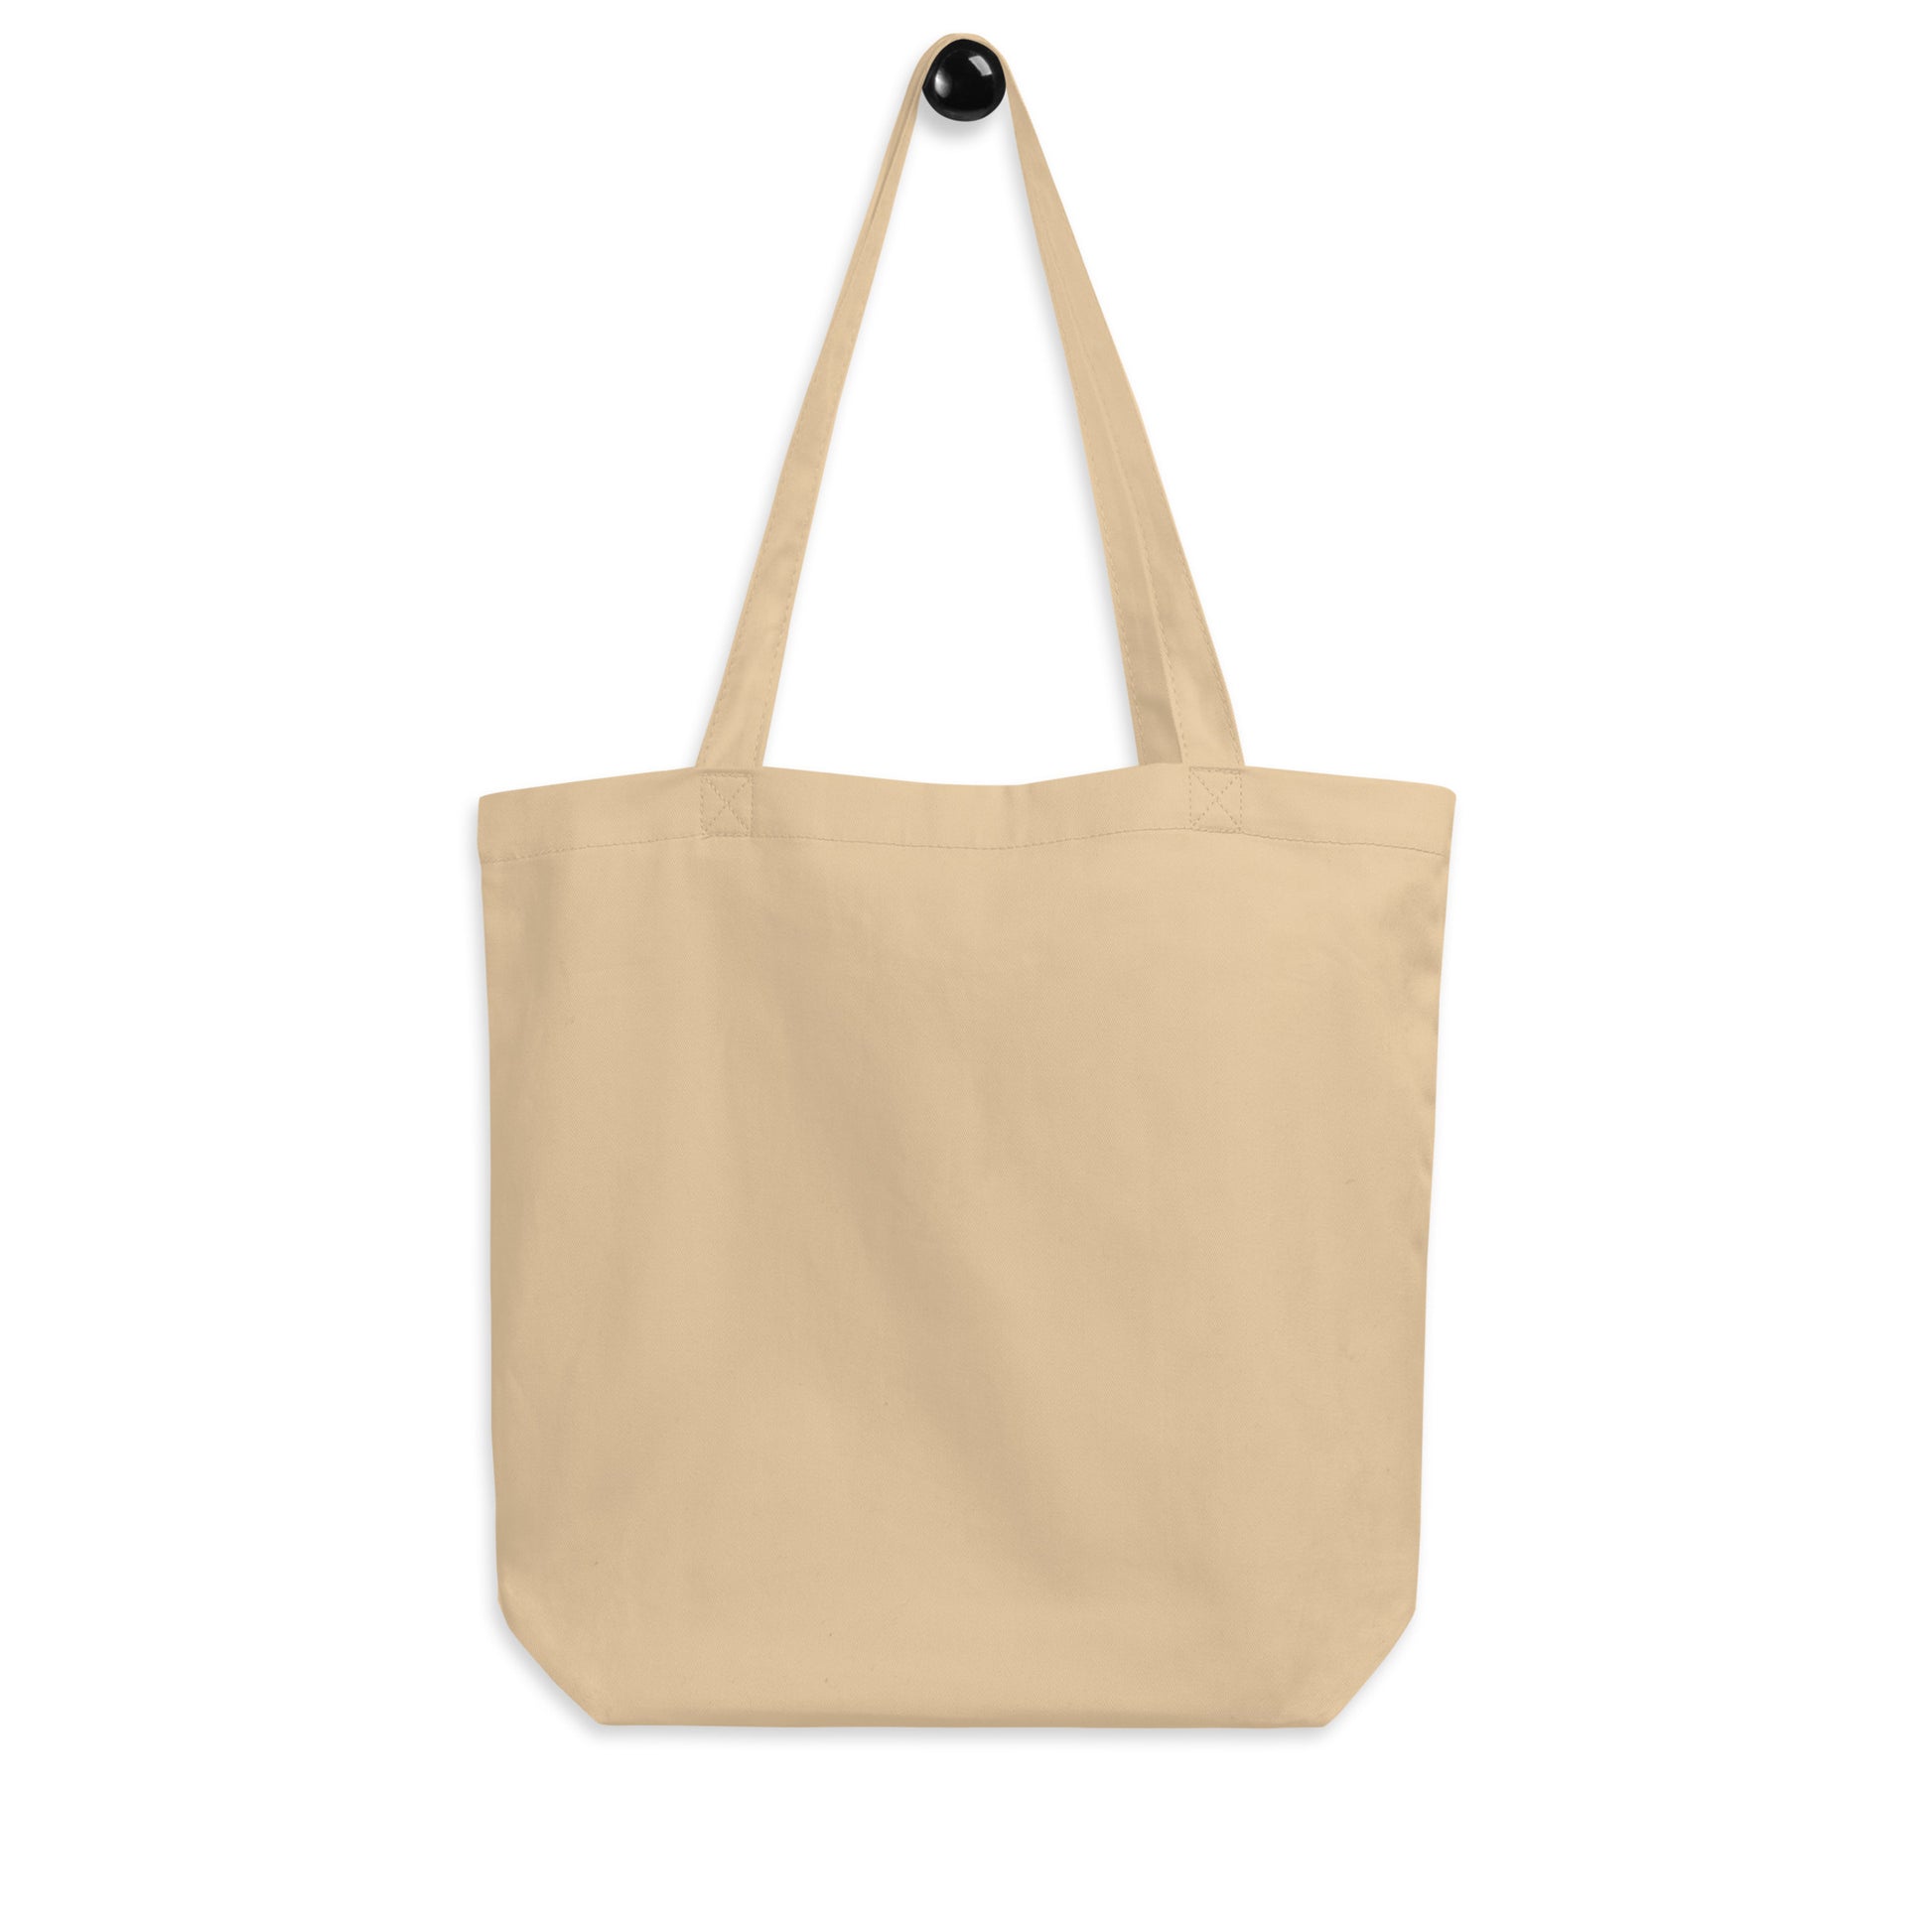 Aviation Gift Organic Tote - Black • EZE Buenos Aires • YHM Designs - Image 05